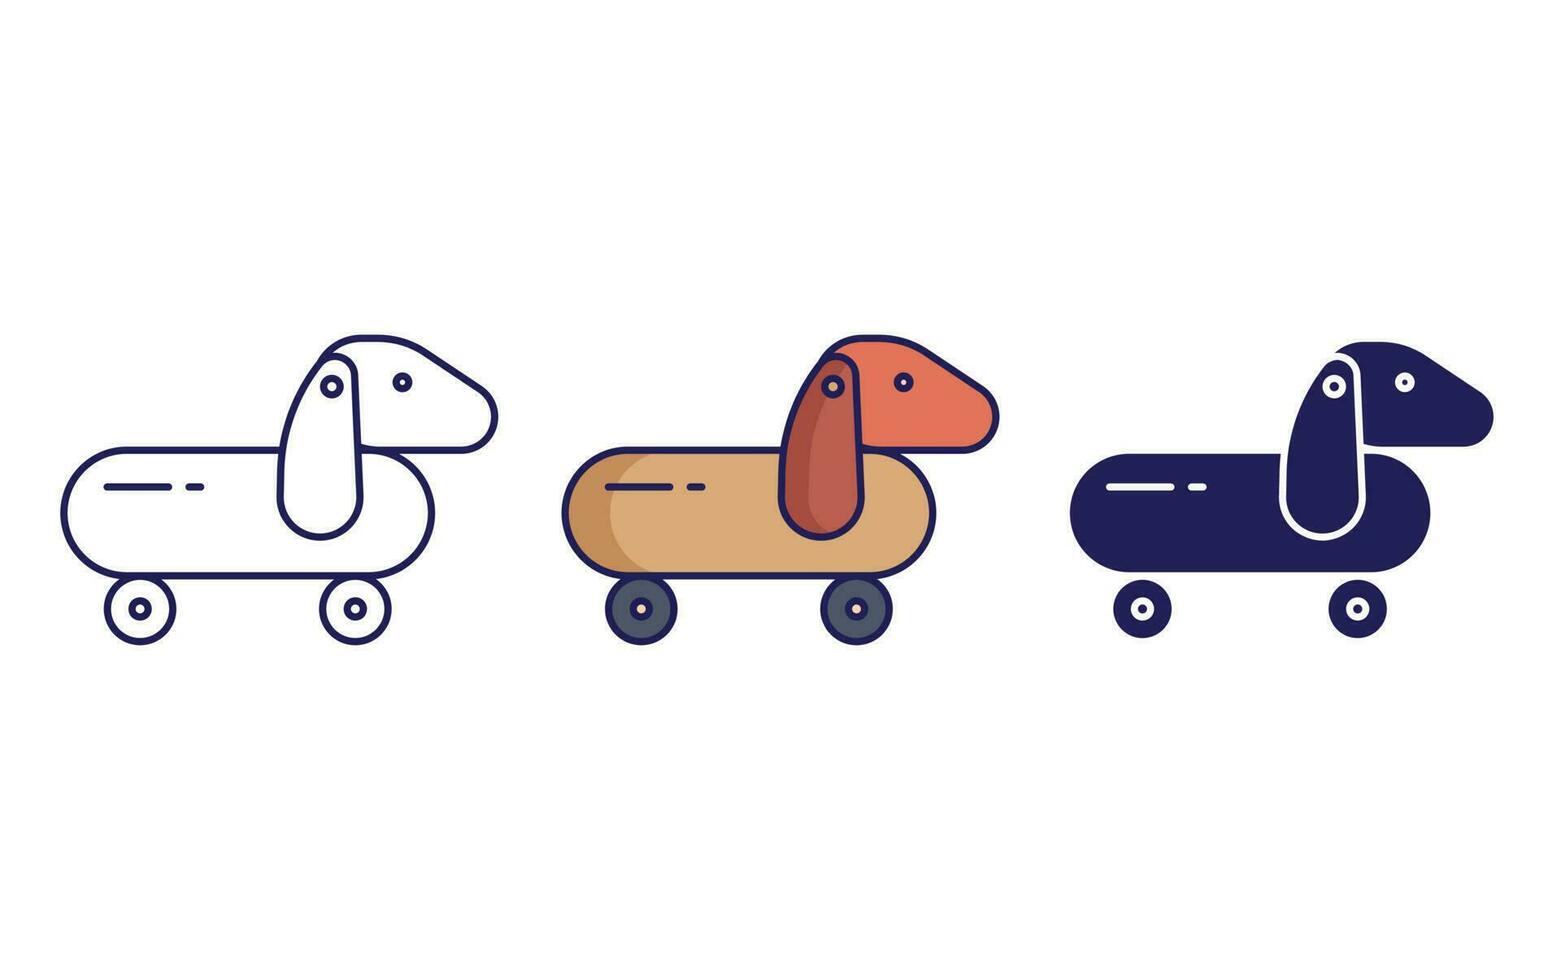 wooden toy dog with wheels vector icon